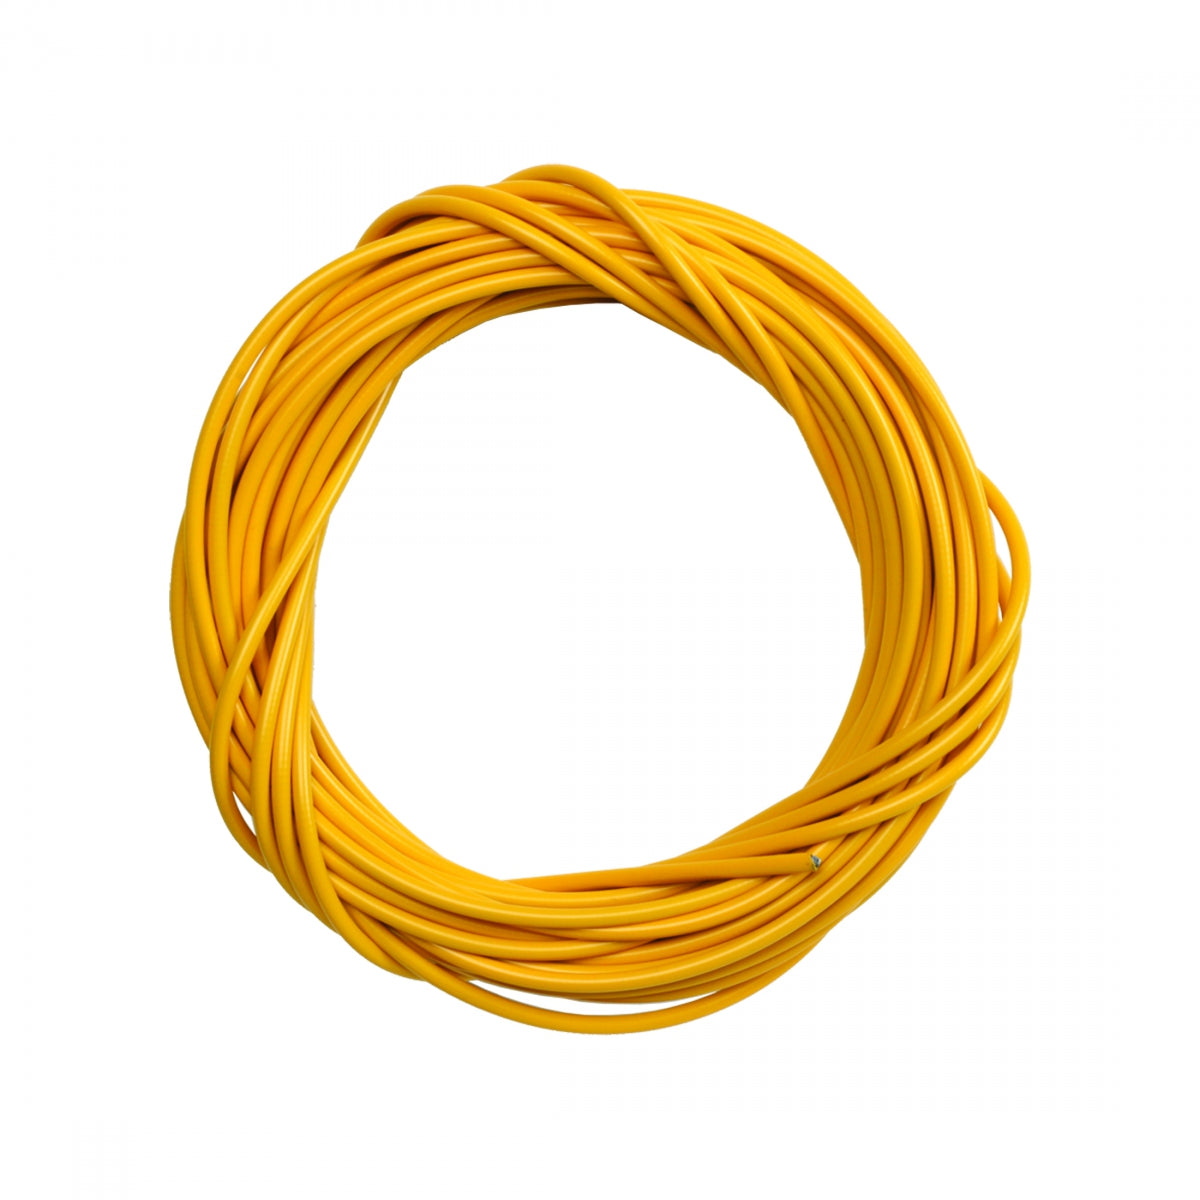 Sunlite Lined Brake Cable Housing, 5mm x 50ft, Yellow